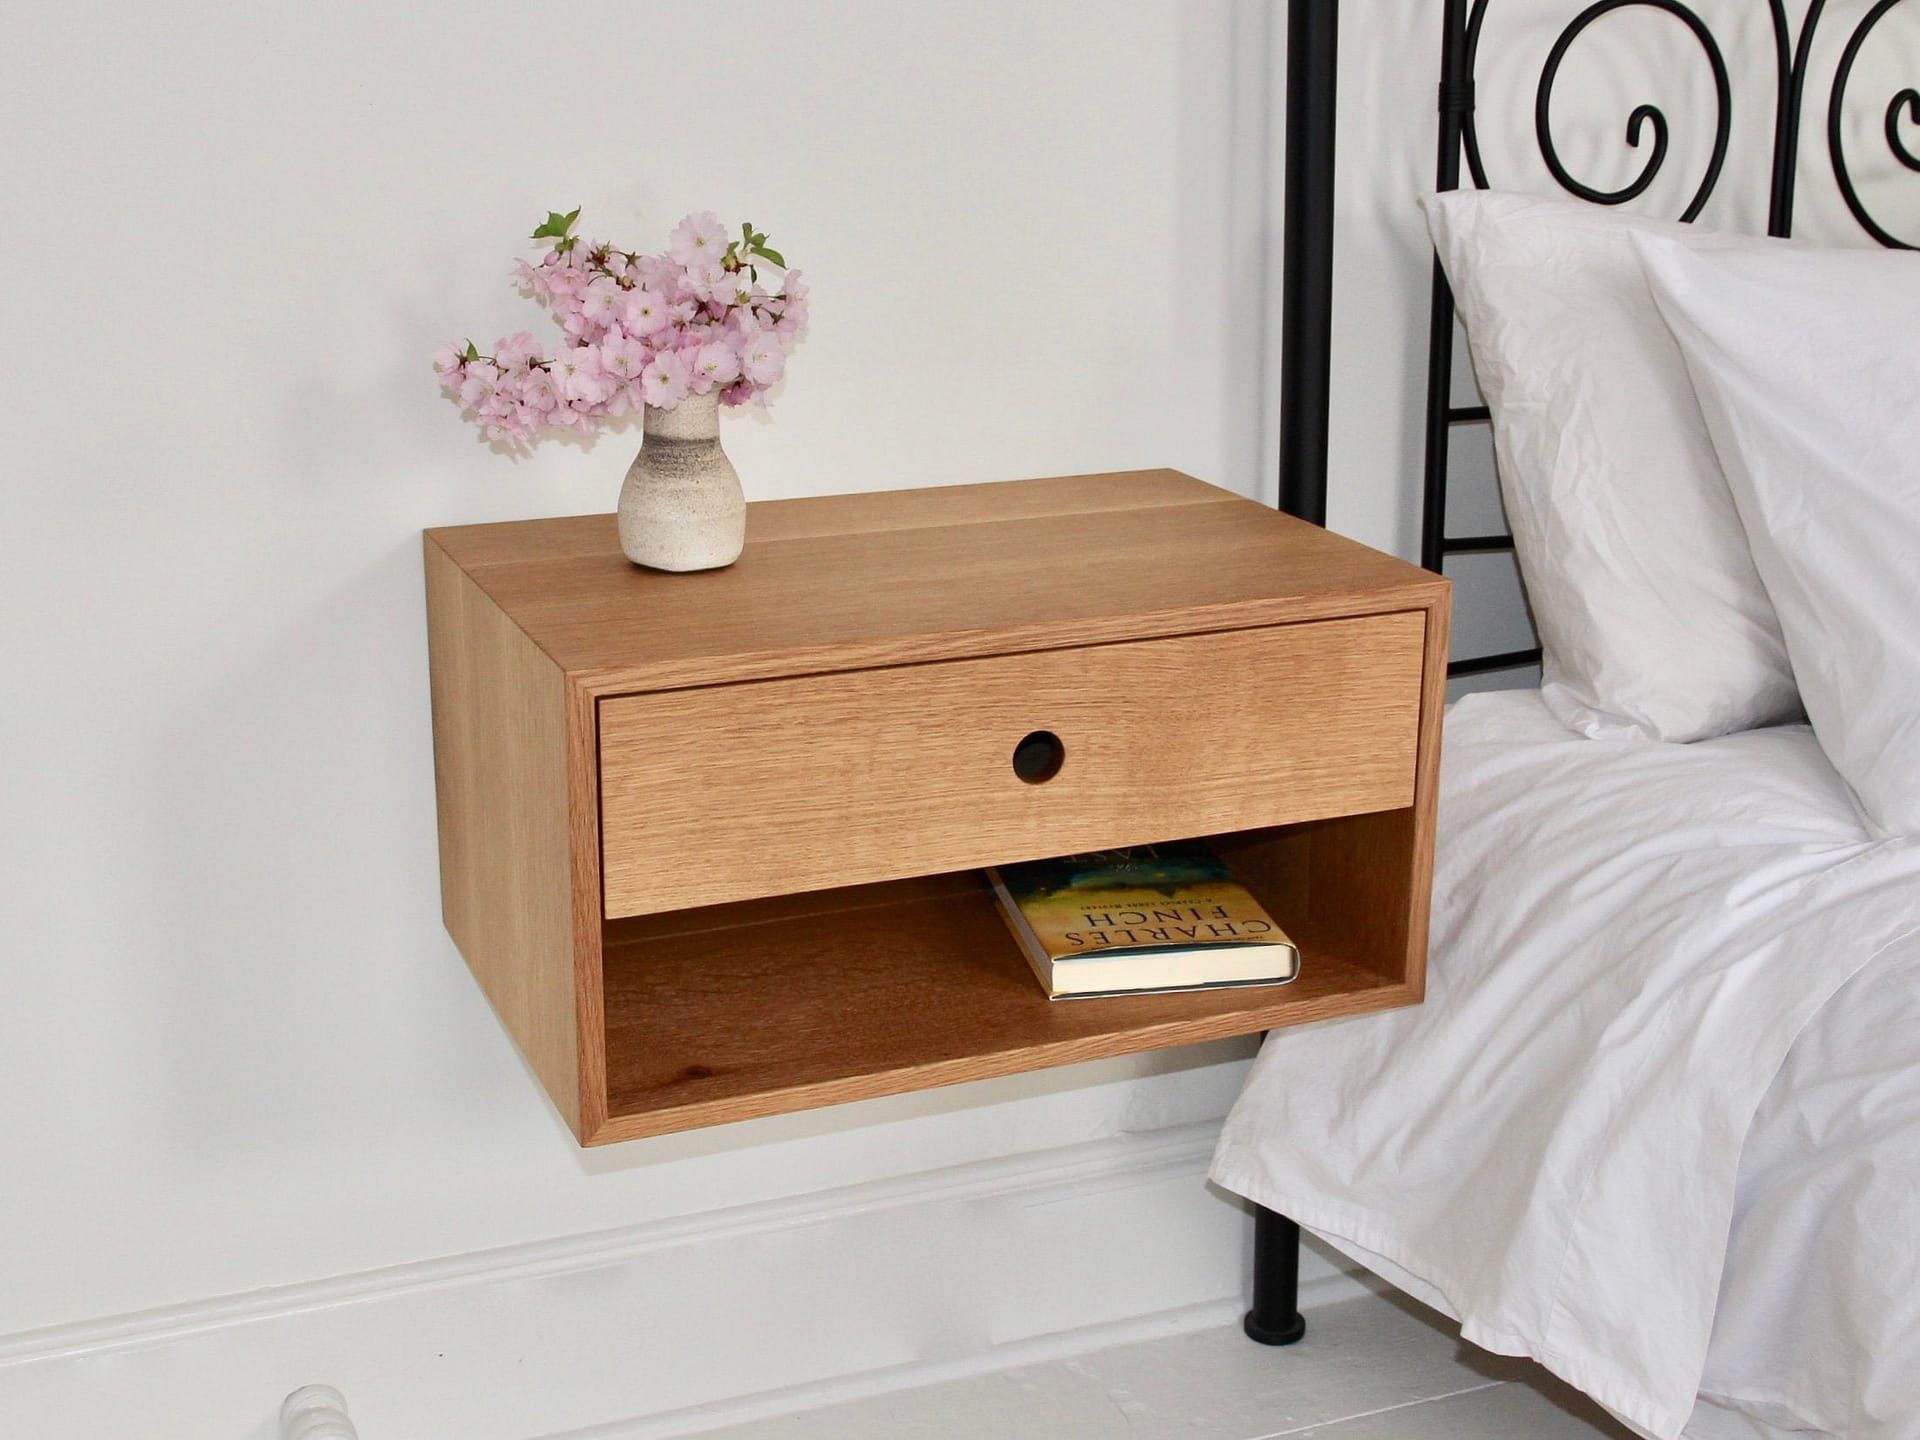 Maintenance Tips for Floating Nightstands